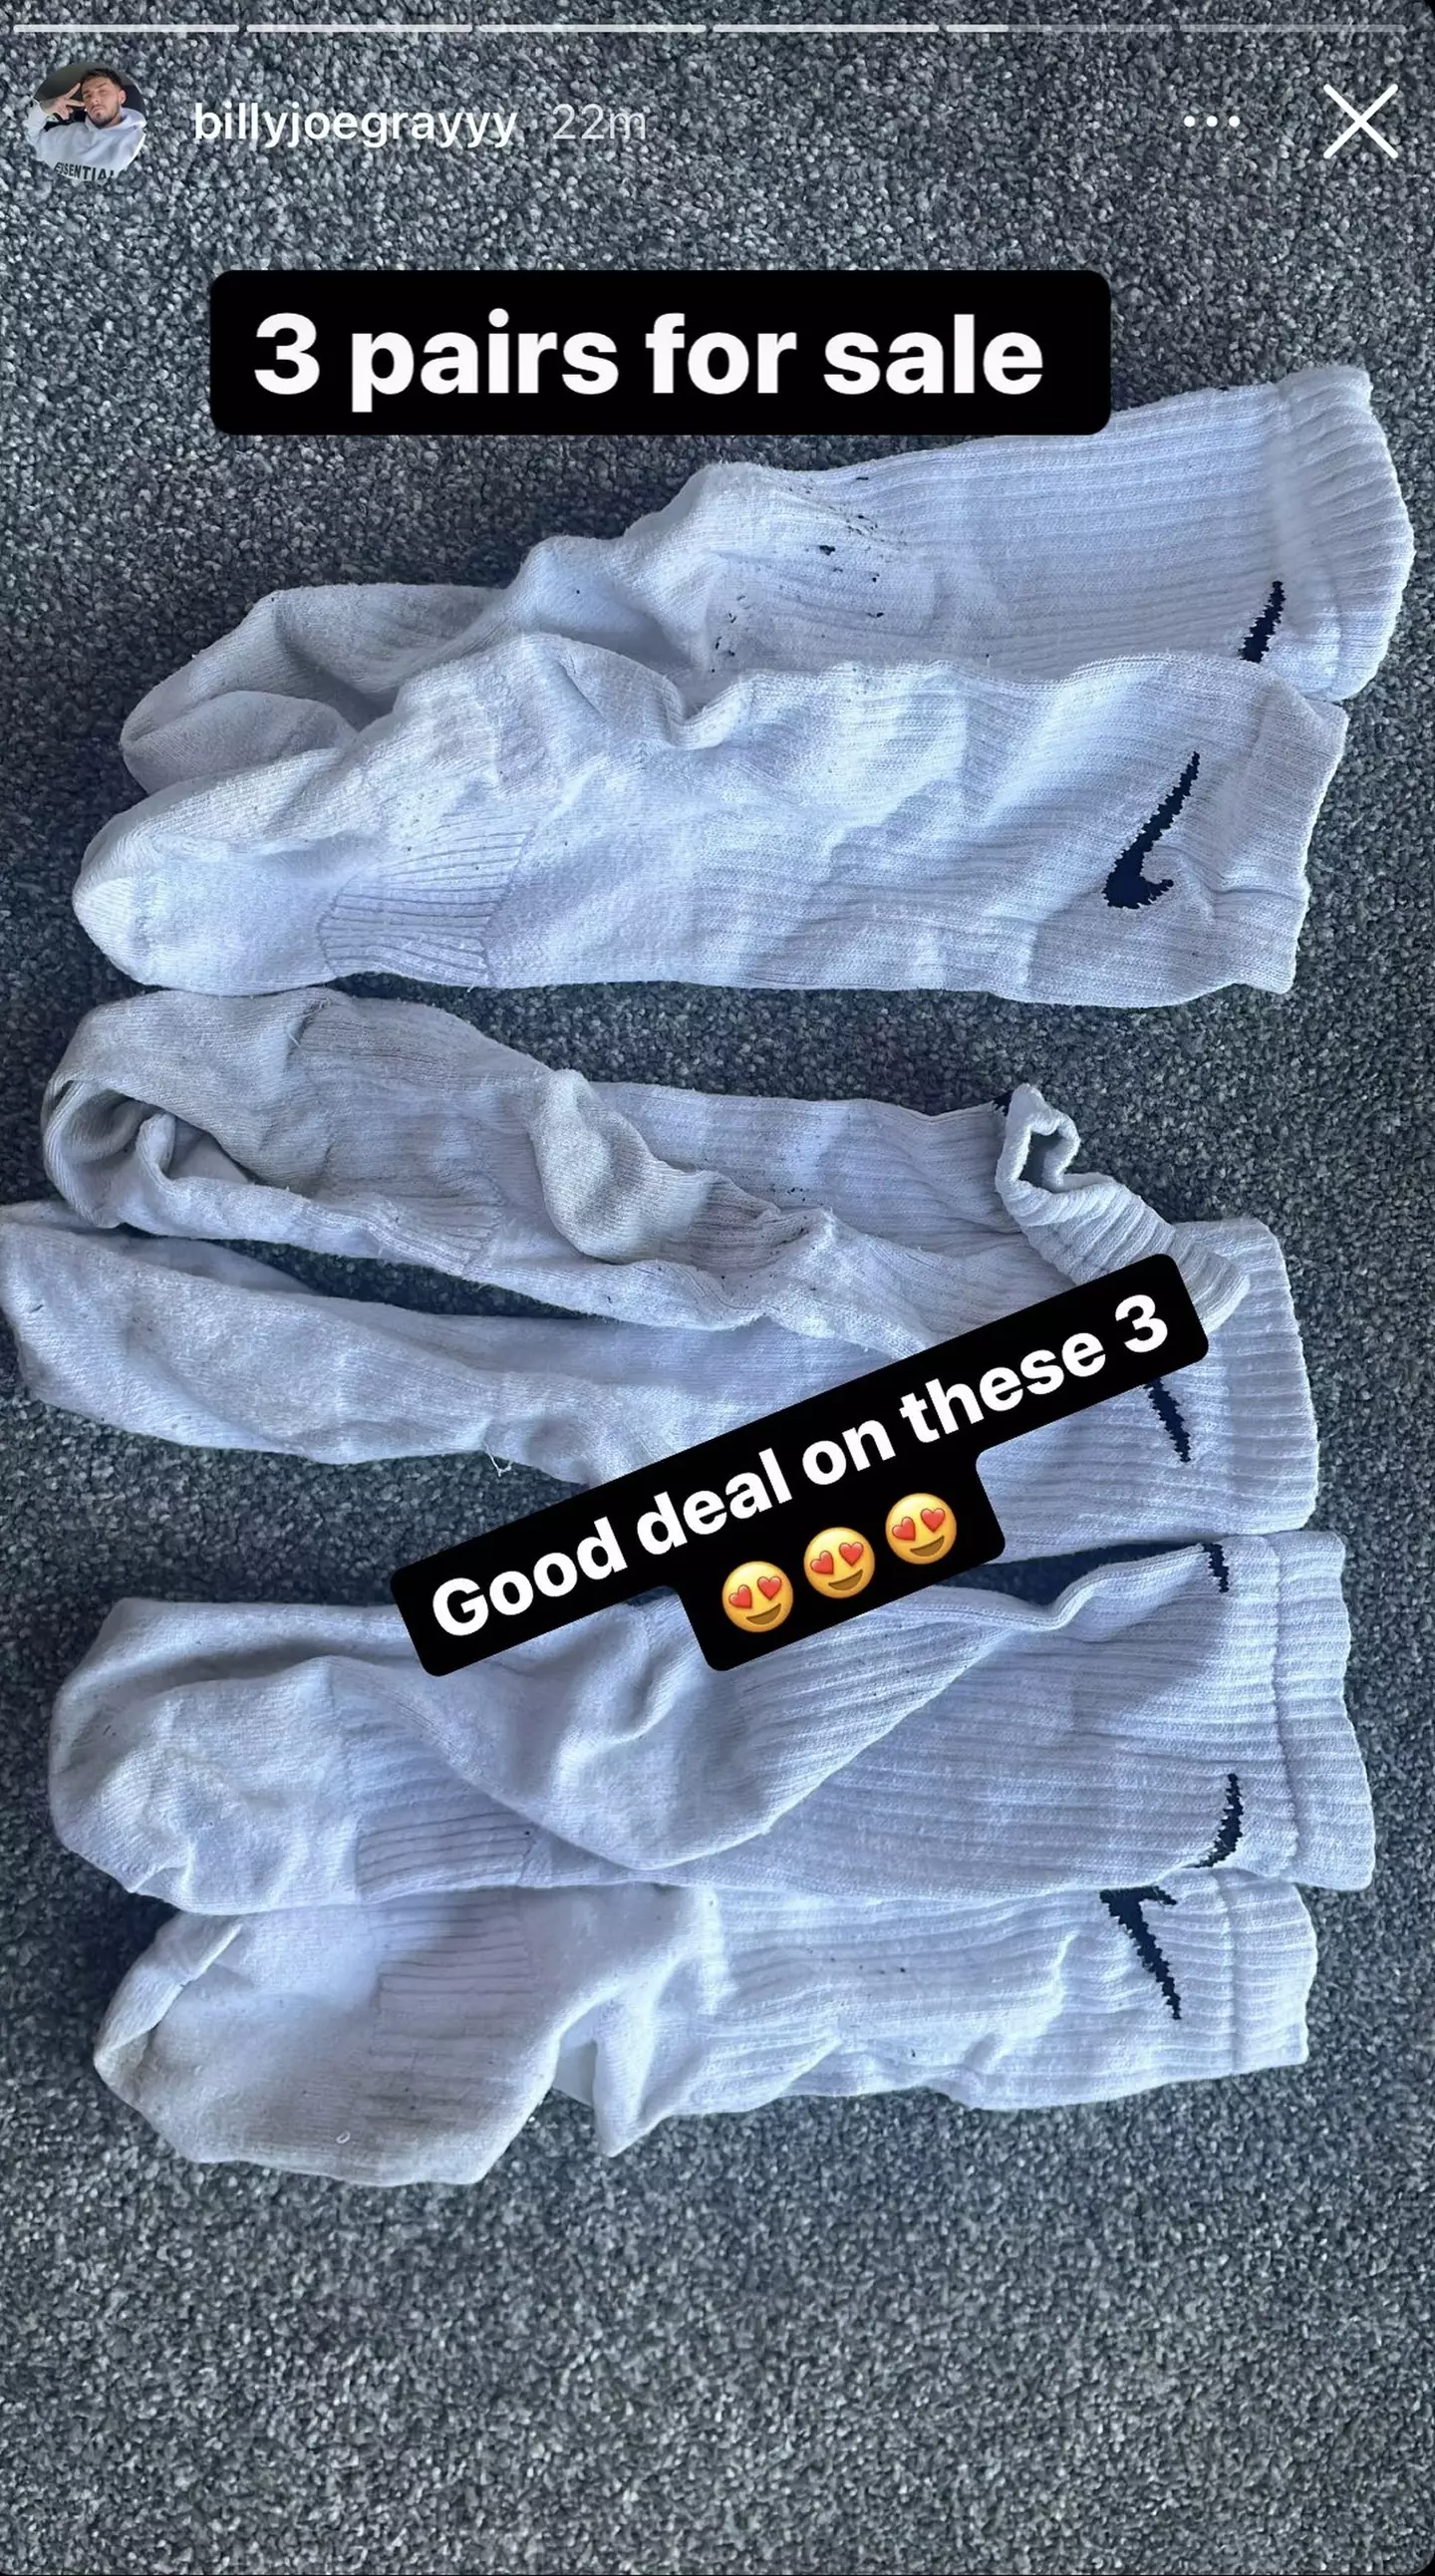 He sells the old socks for between £10 and £30 a pair.